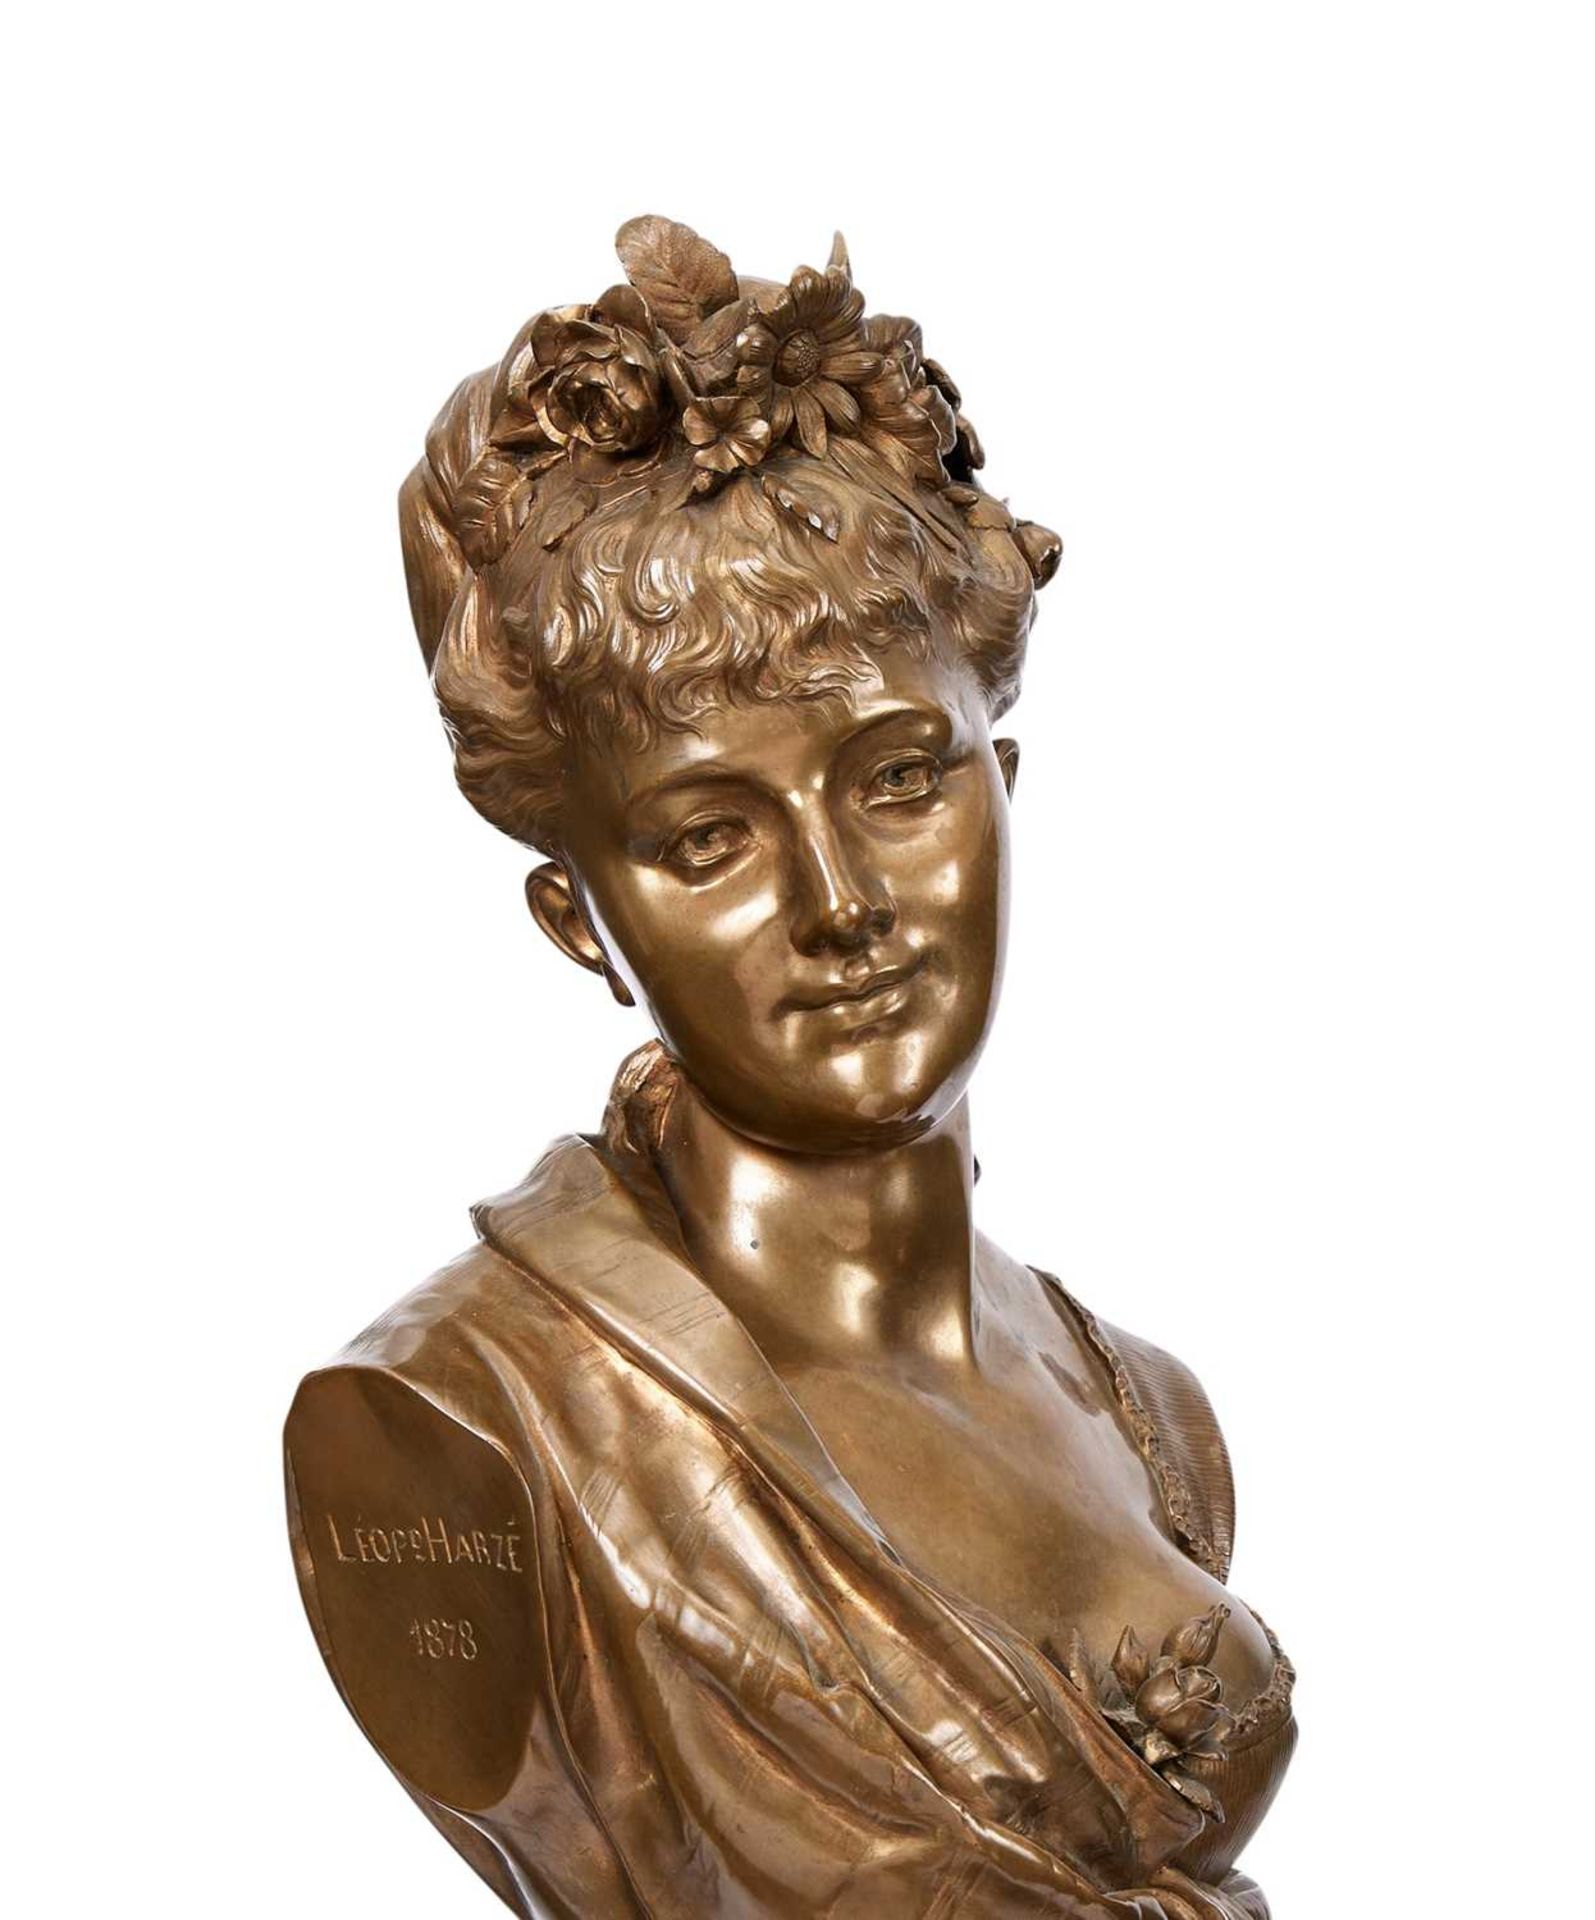 LEOPOLD HARZE (BELGIAN, 1831-1893): A LARGE BRONZE BUST OF A GIRL ON MARBLE BASE - Image 3 of 6